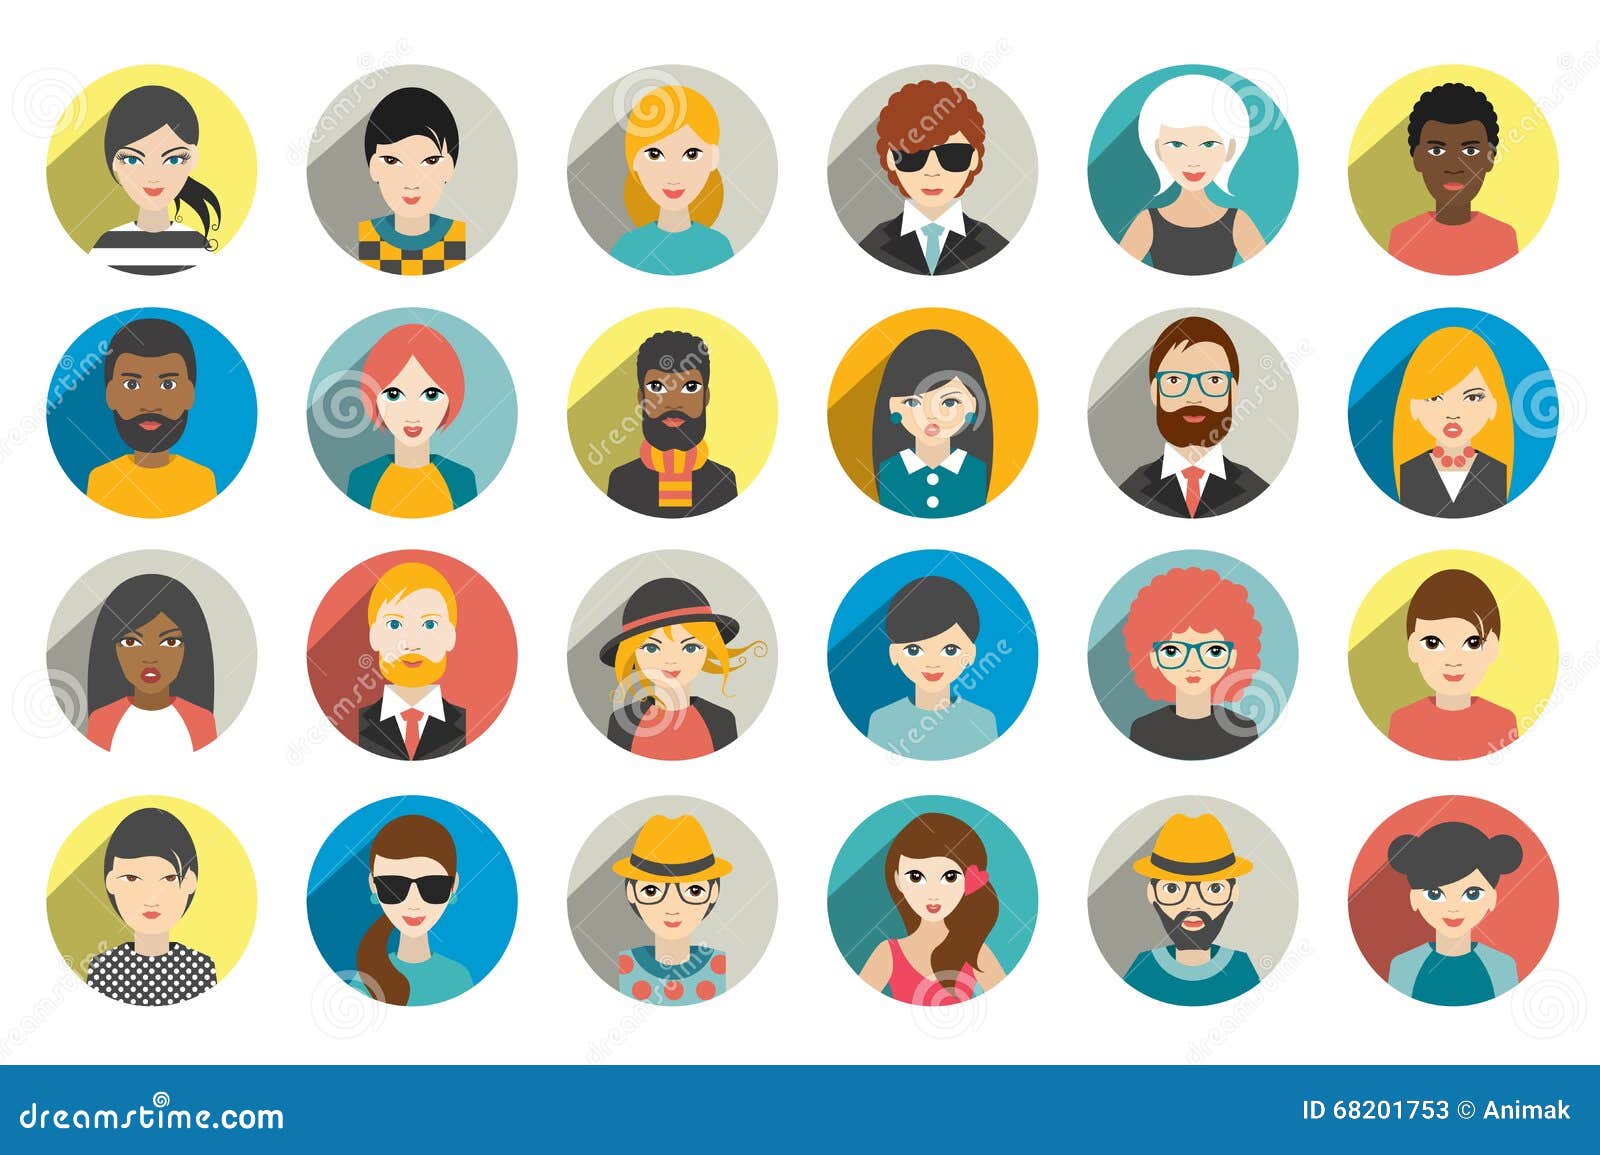 set of circle persons, avatars, people heads different nationality in flat style.